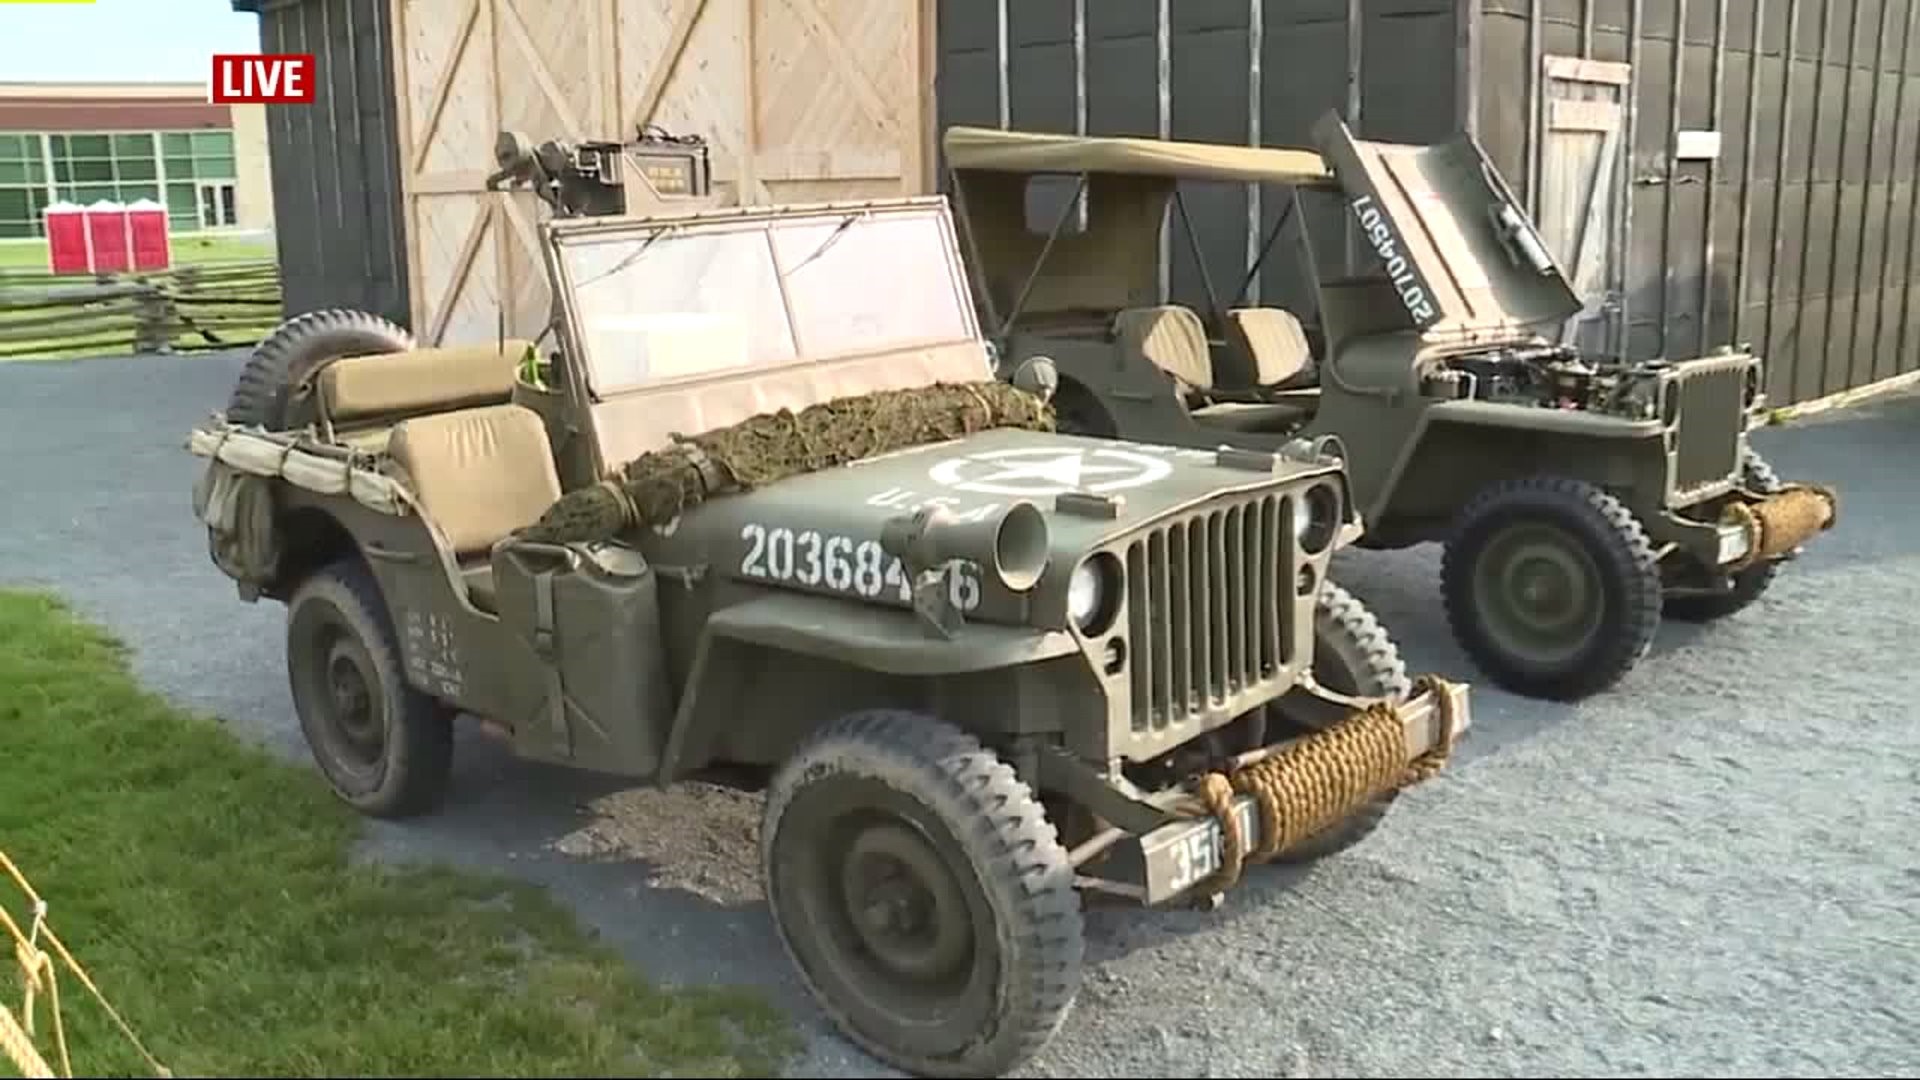 2019 Army Heritage Days "Remembering D-Day"